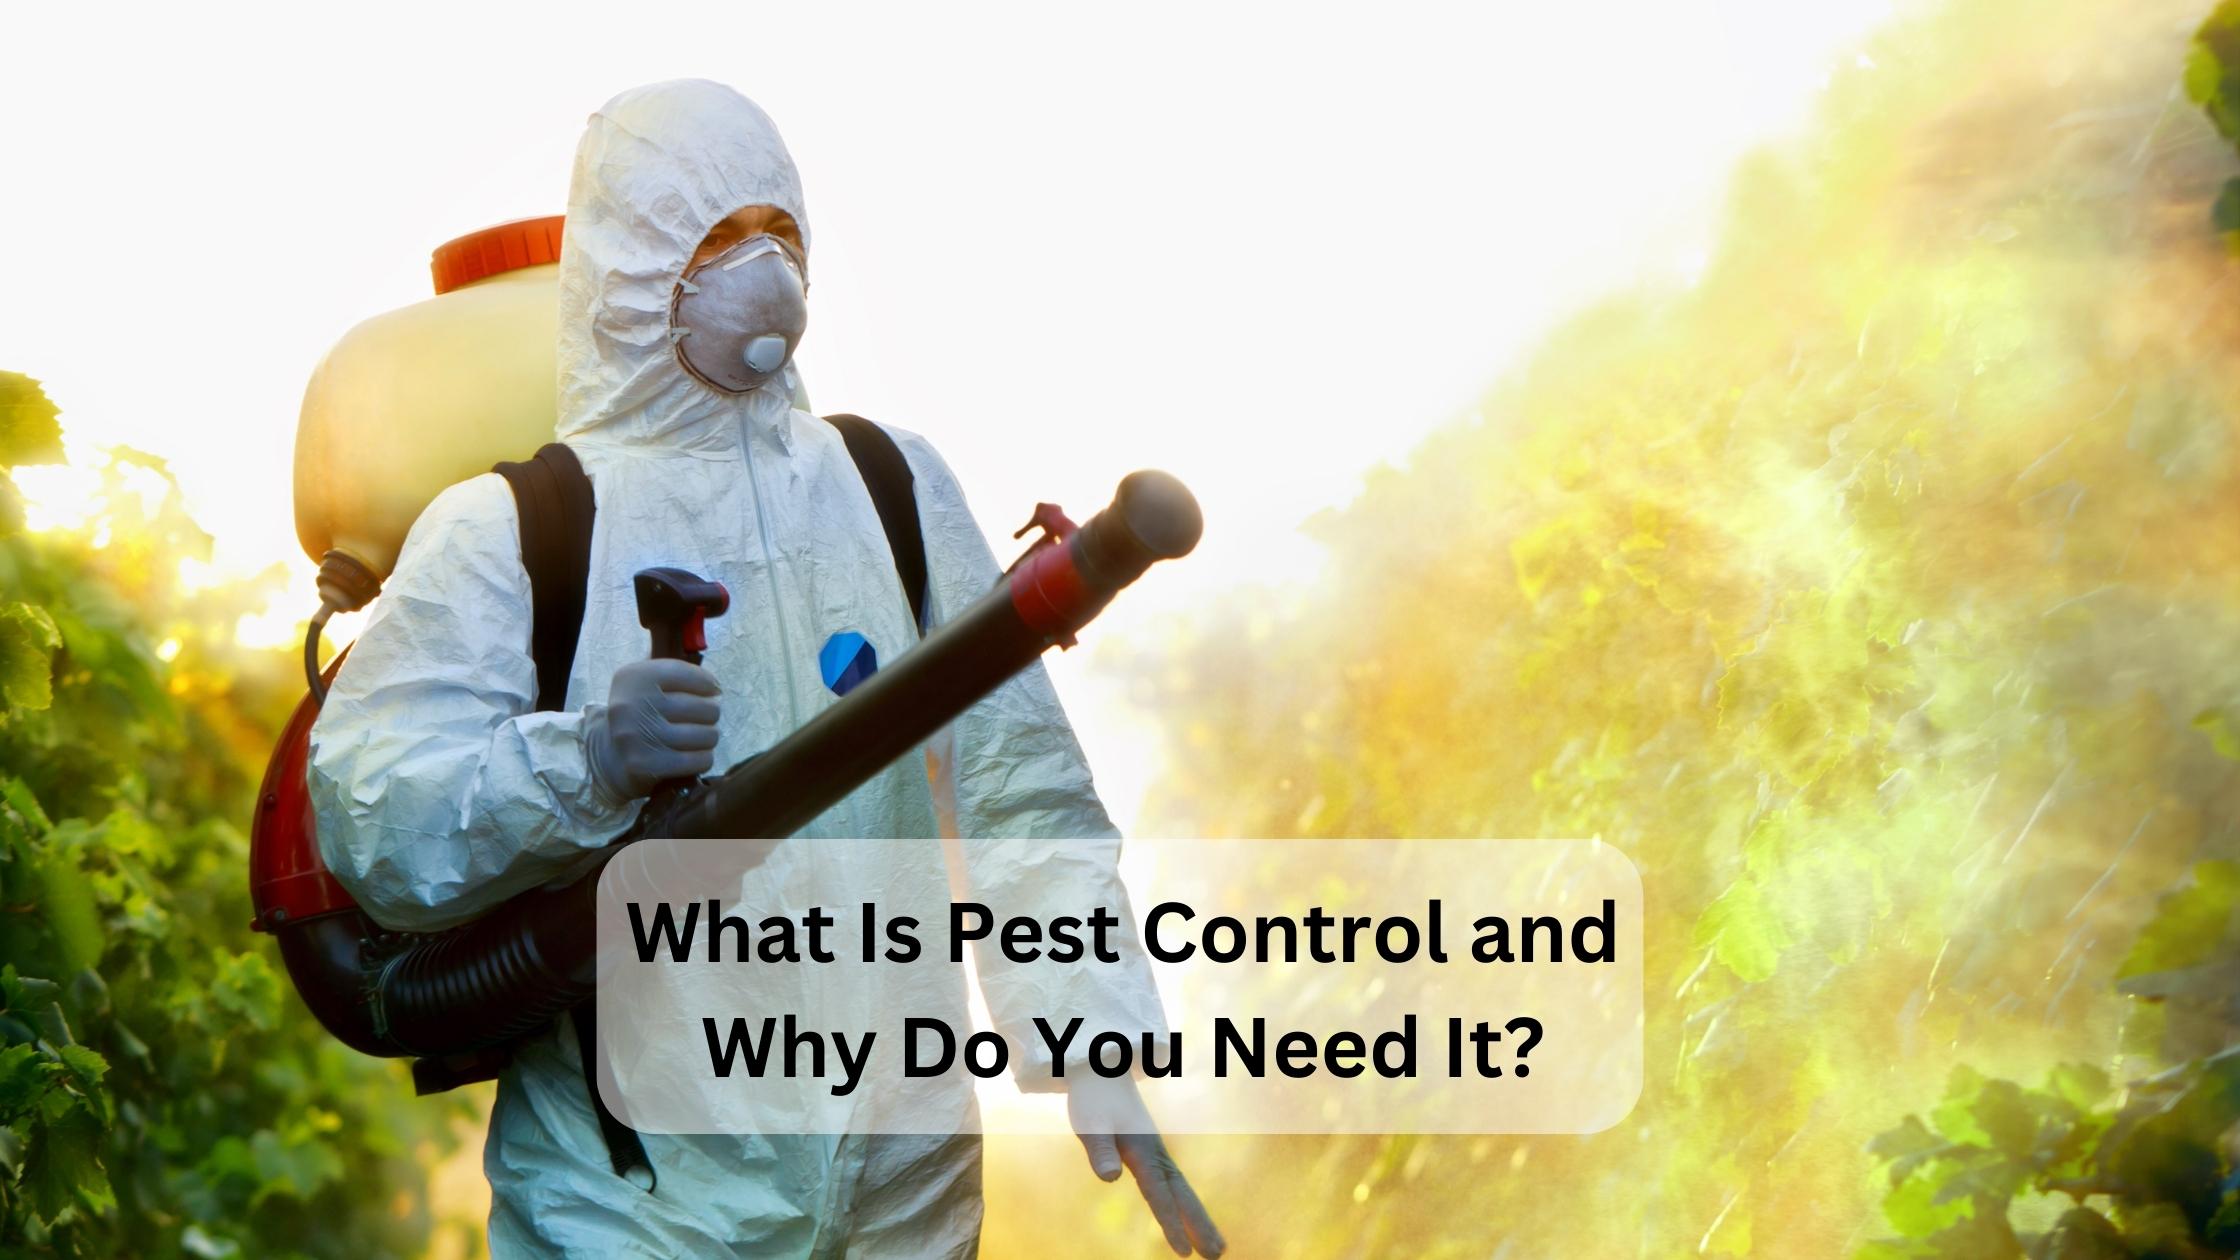 What is pest control and why do you need it